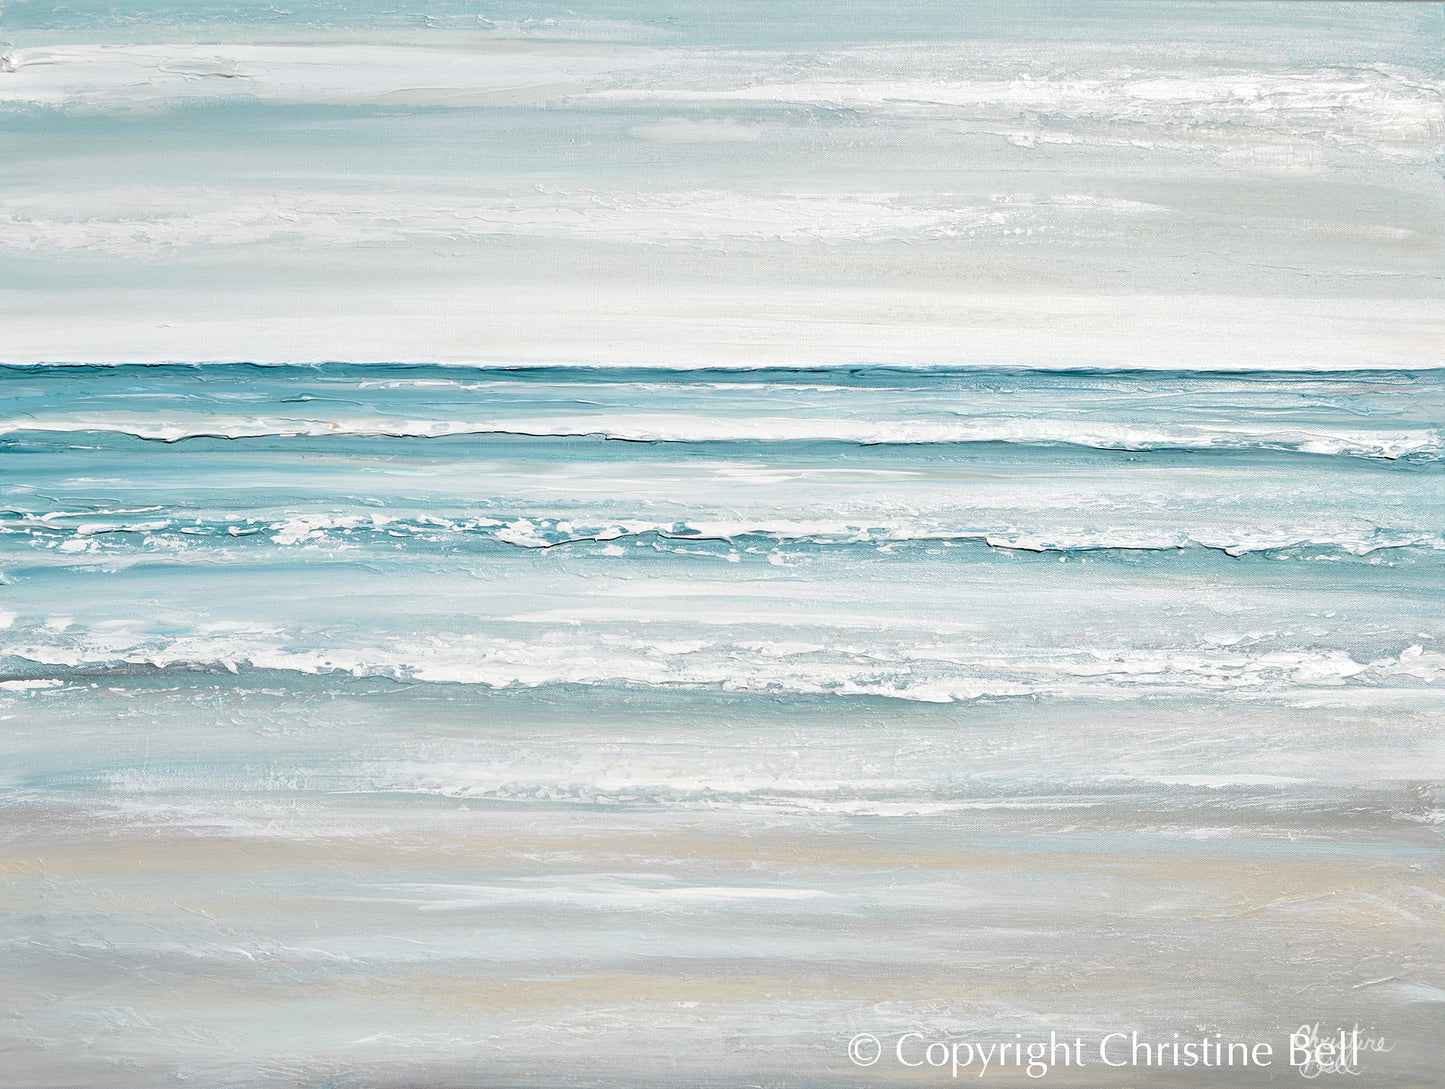 "A Place of Solitude" ORIGINAL Textured Seascape Painting 40x30"